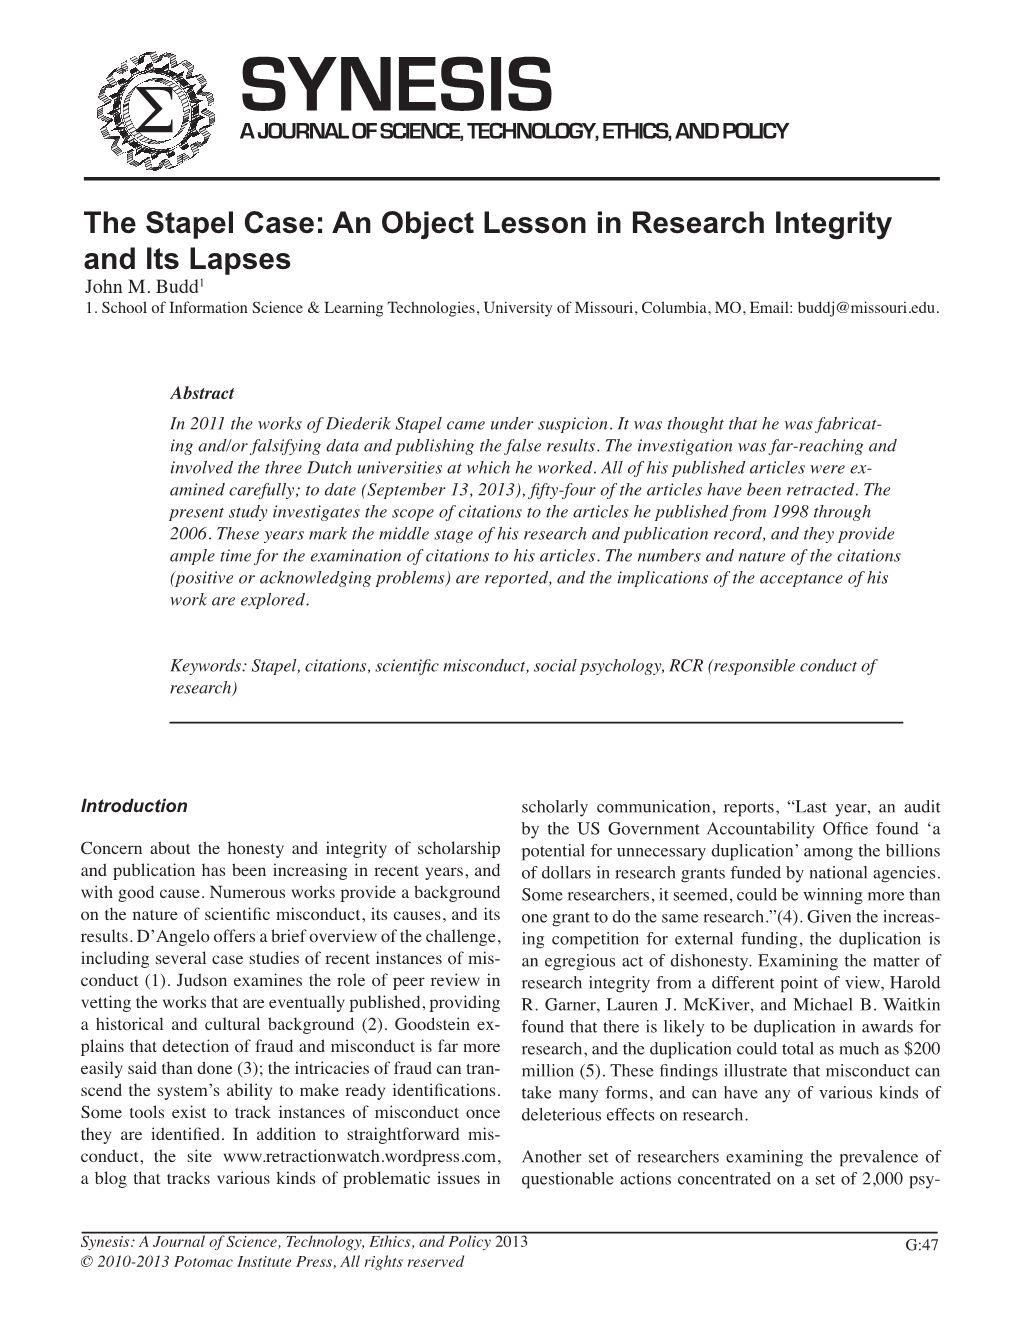 The Stapel Case: an Object Lesson in Research Integrity and Its Lapses John M